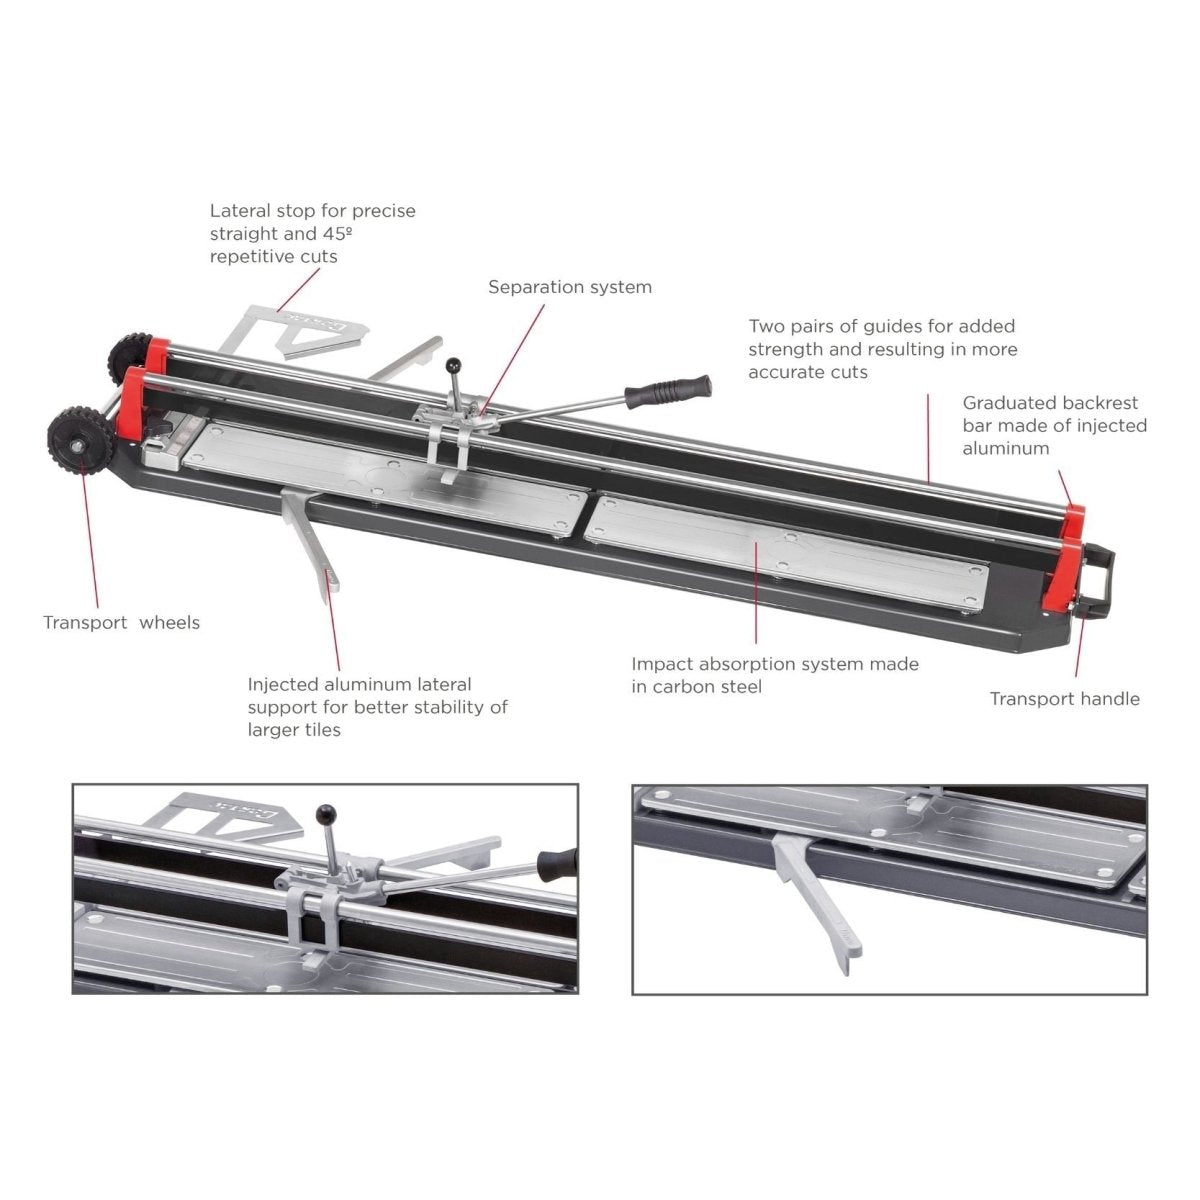 MASTER PLUS-125 - 49 Inch Tile Cutter - Cortag